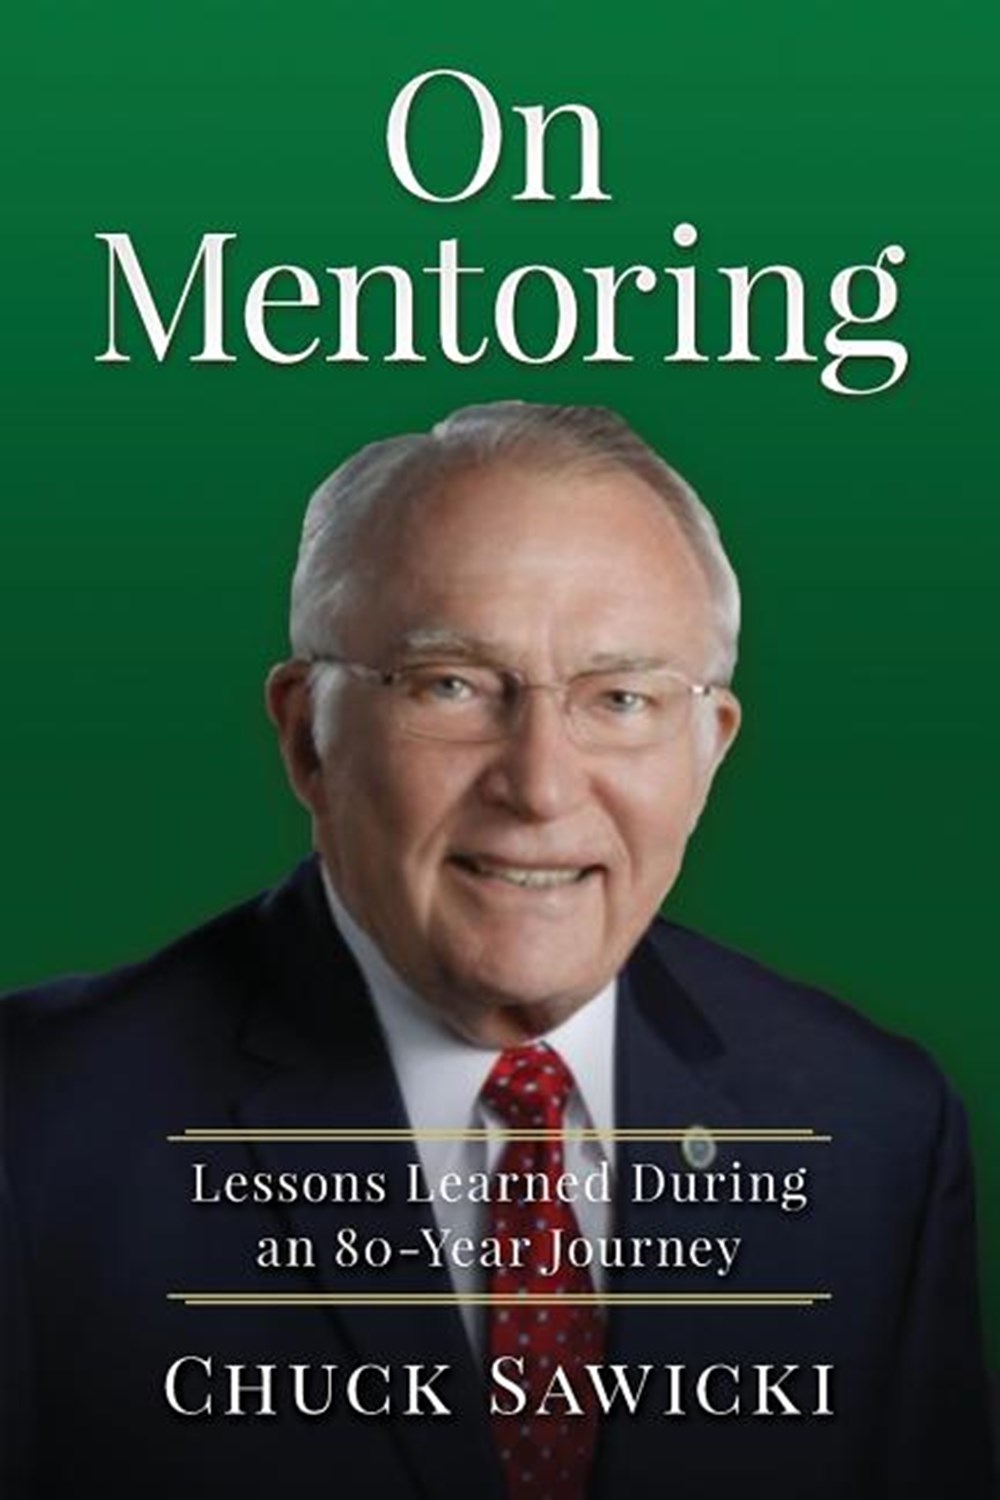 On Mentoring Lessons Learned During an 80-year Journey